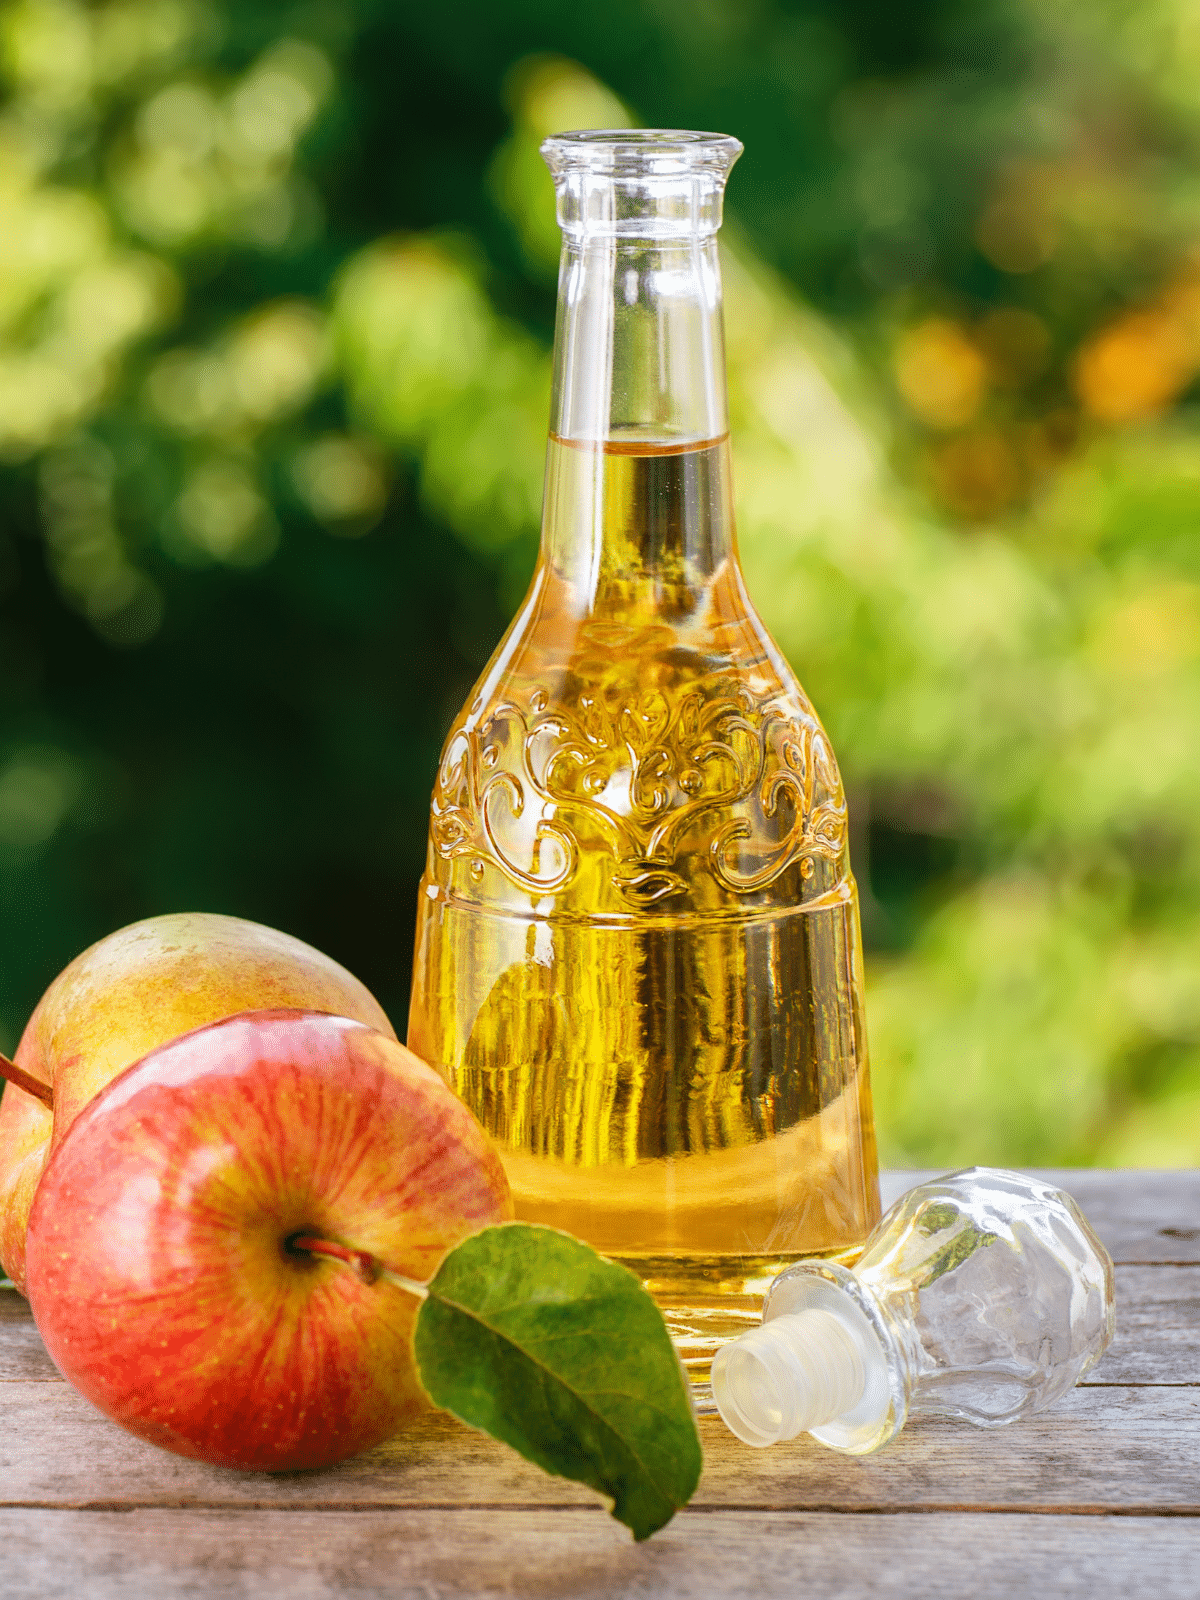 Apple cider vinegar in a bottle on a wooden table, with apples on the side.